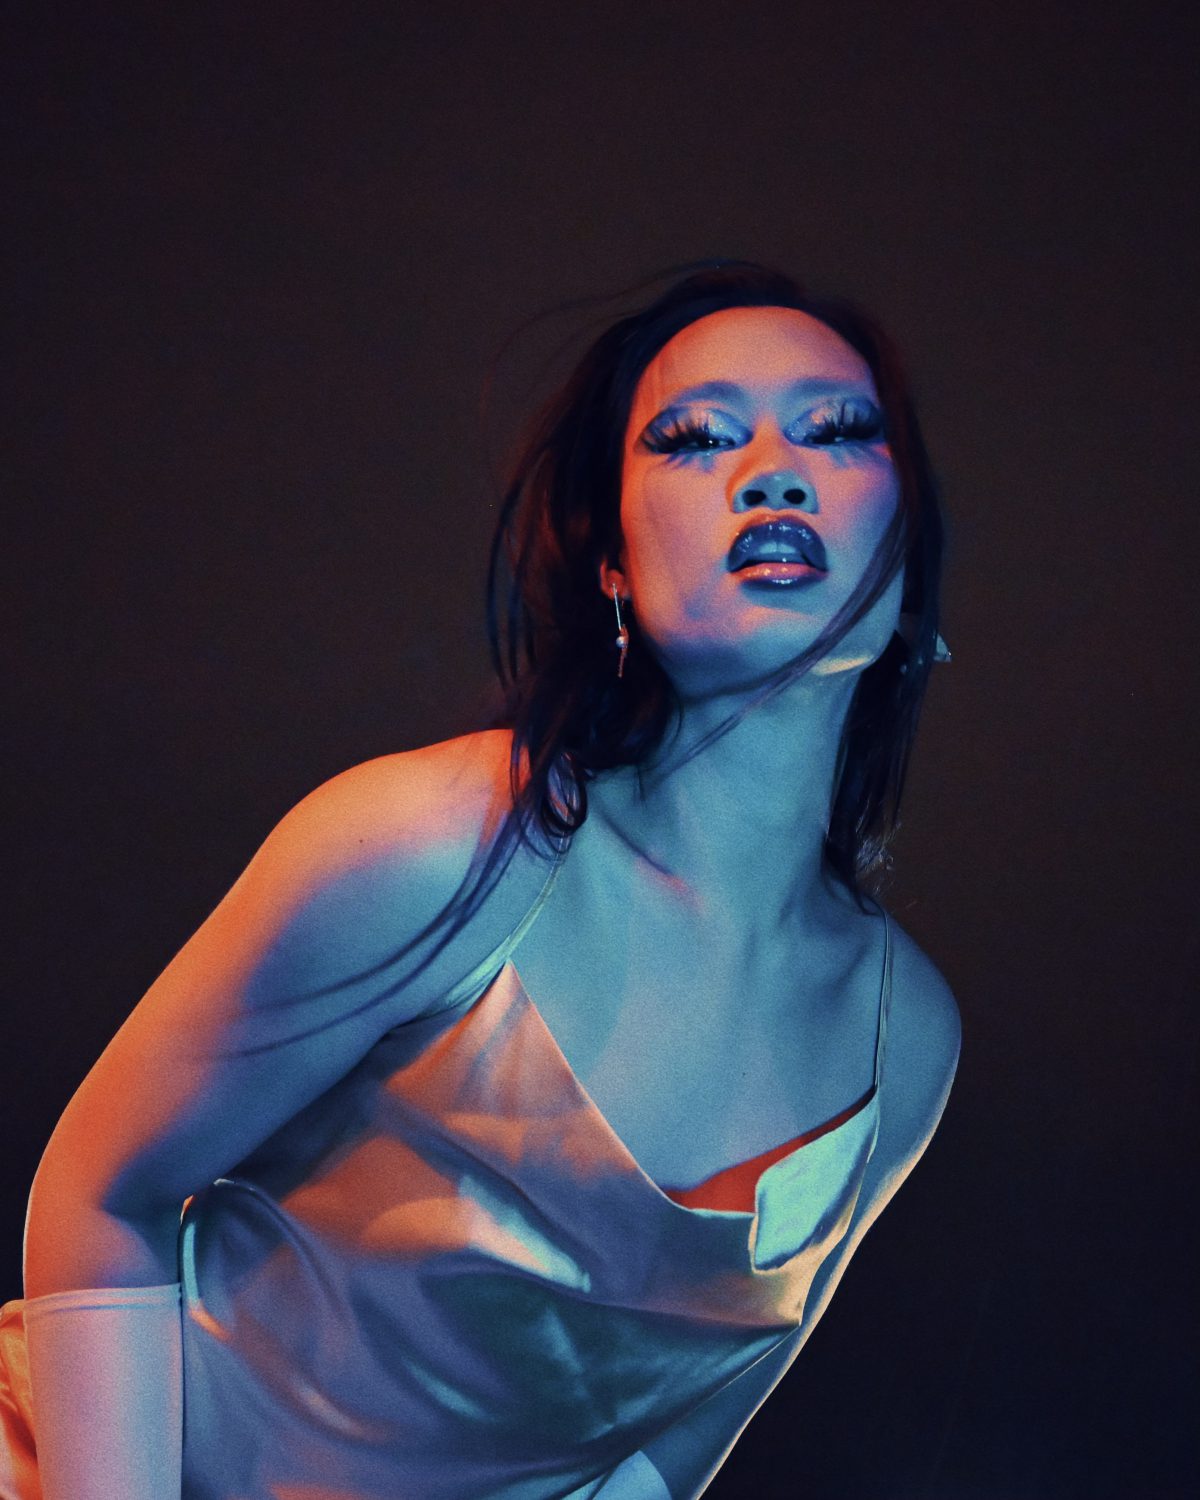 Performer Kylie Mooncakes poses for the camera. Long black hair falling on their shoulders, long eye lashes, lush red lips and wearing a gold dress, Kylie is lit by contrasting red and blue lights in front of a black background.